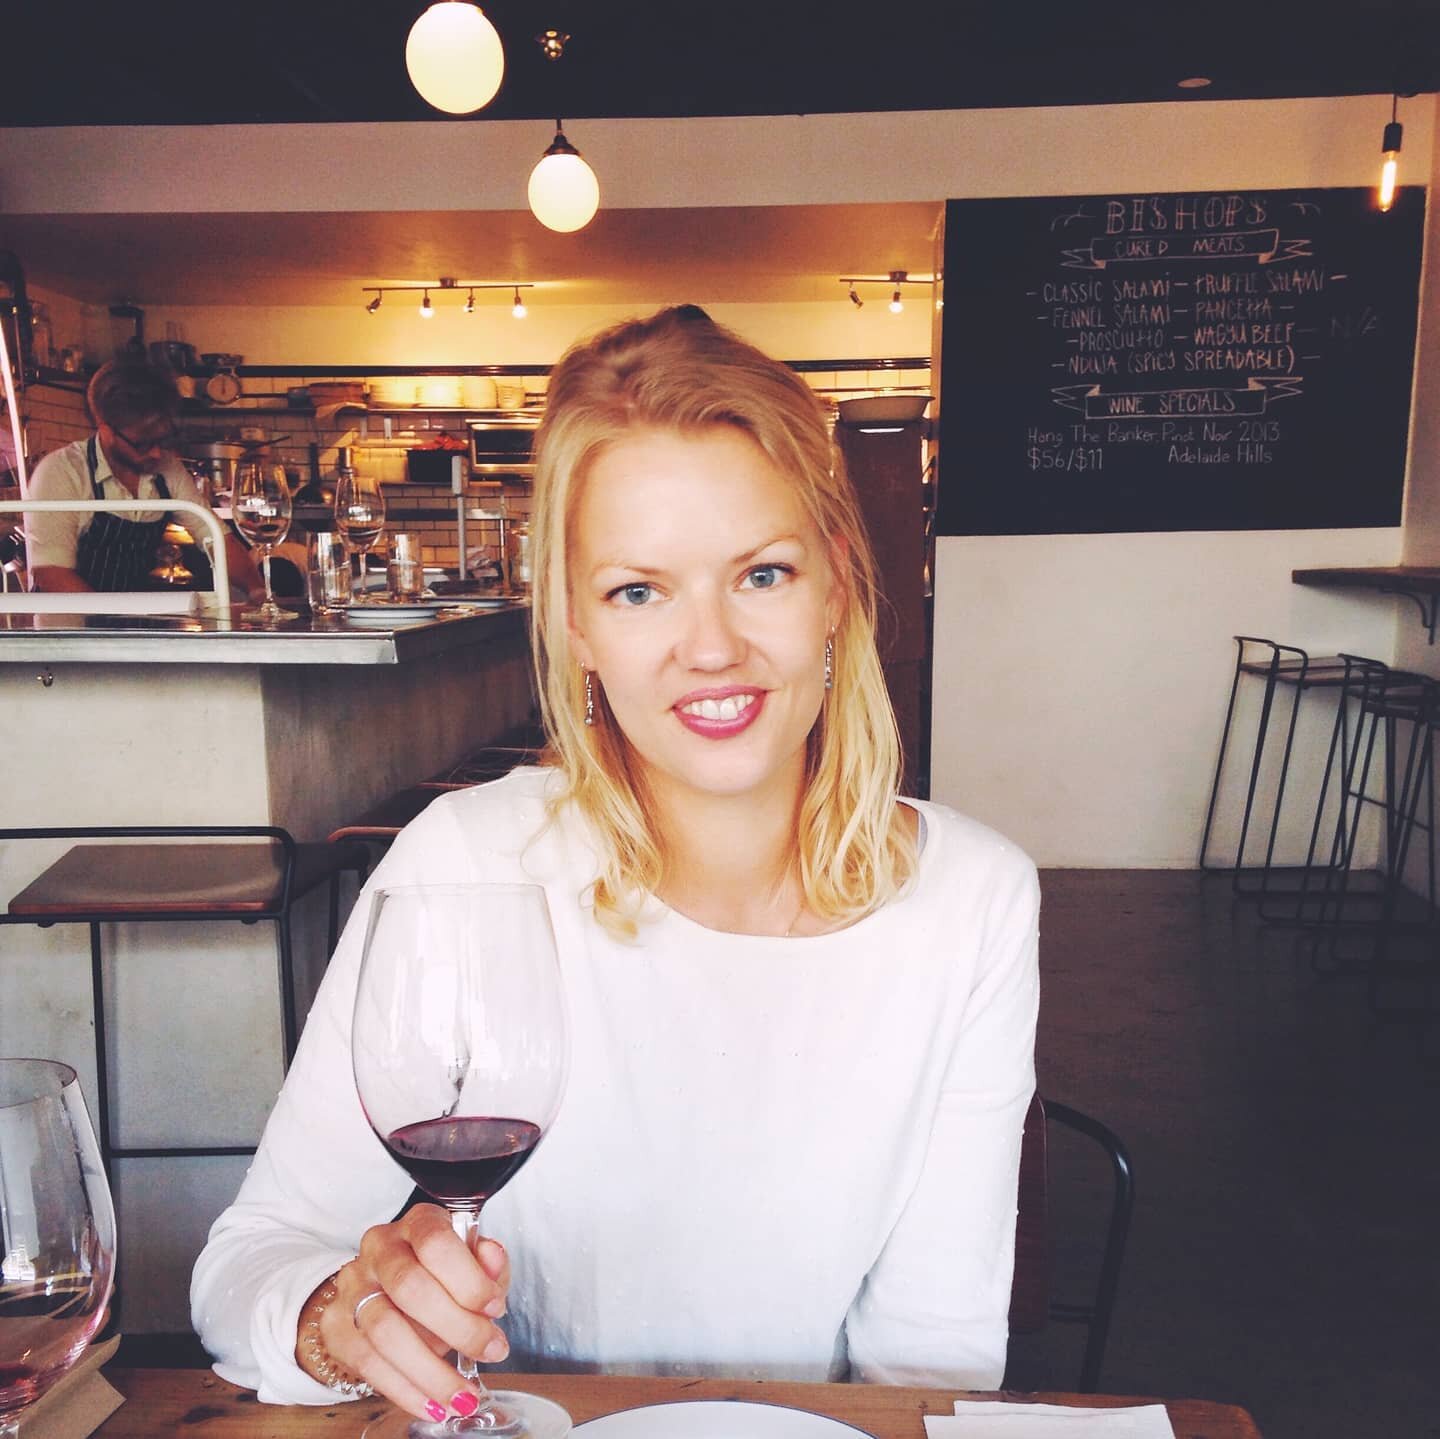 Welcome to the Team Elina🍷

Elina has over a decade of experience as a sommelier in some of Sydney's best venues and the newest member of the Bolt Hospitality team ⚡

Bolt Hospitality is now offering wine consultancy and WSET training as part of our